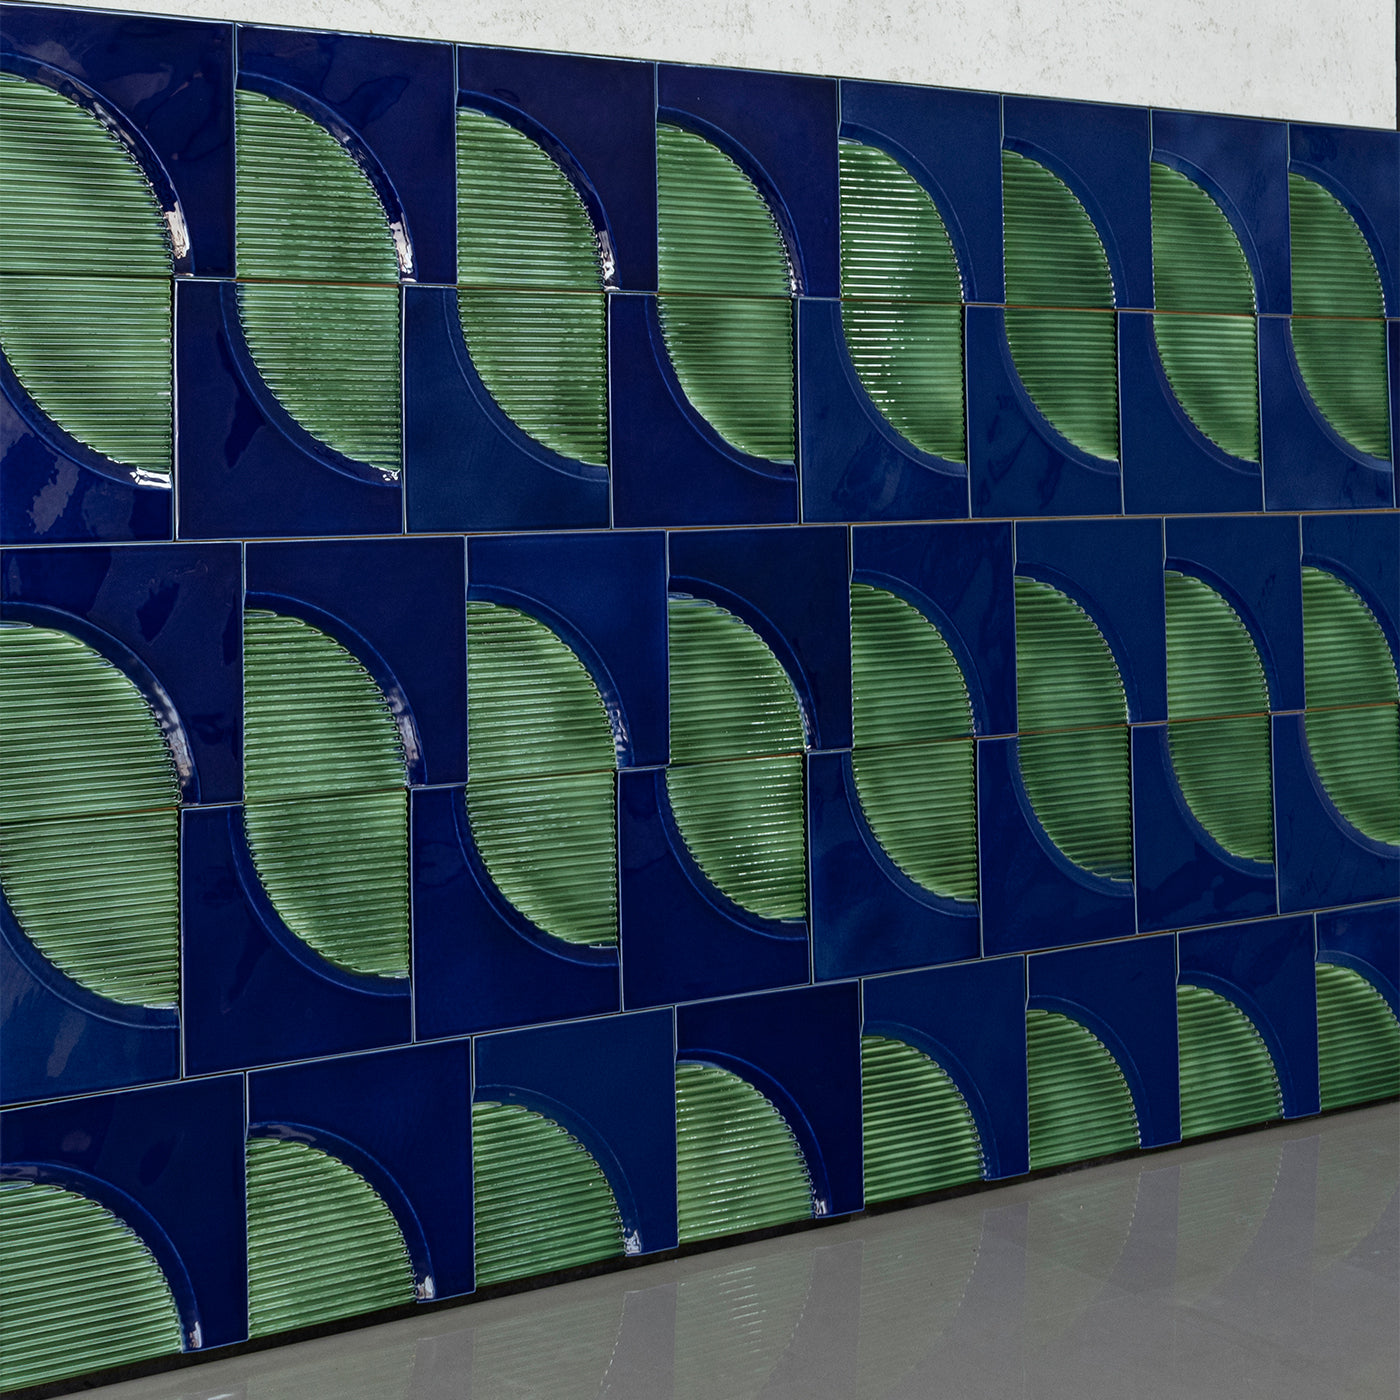 Arena Blue-And-Green Wall Covering by Giacomo Totti - Alternative view 1